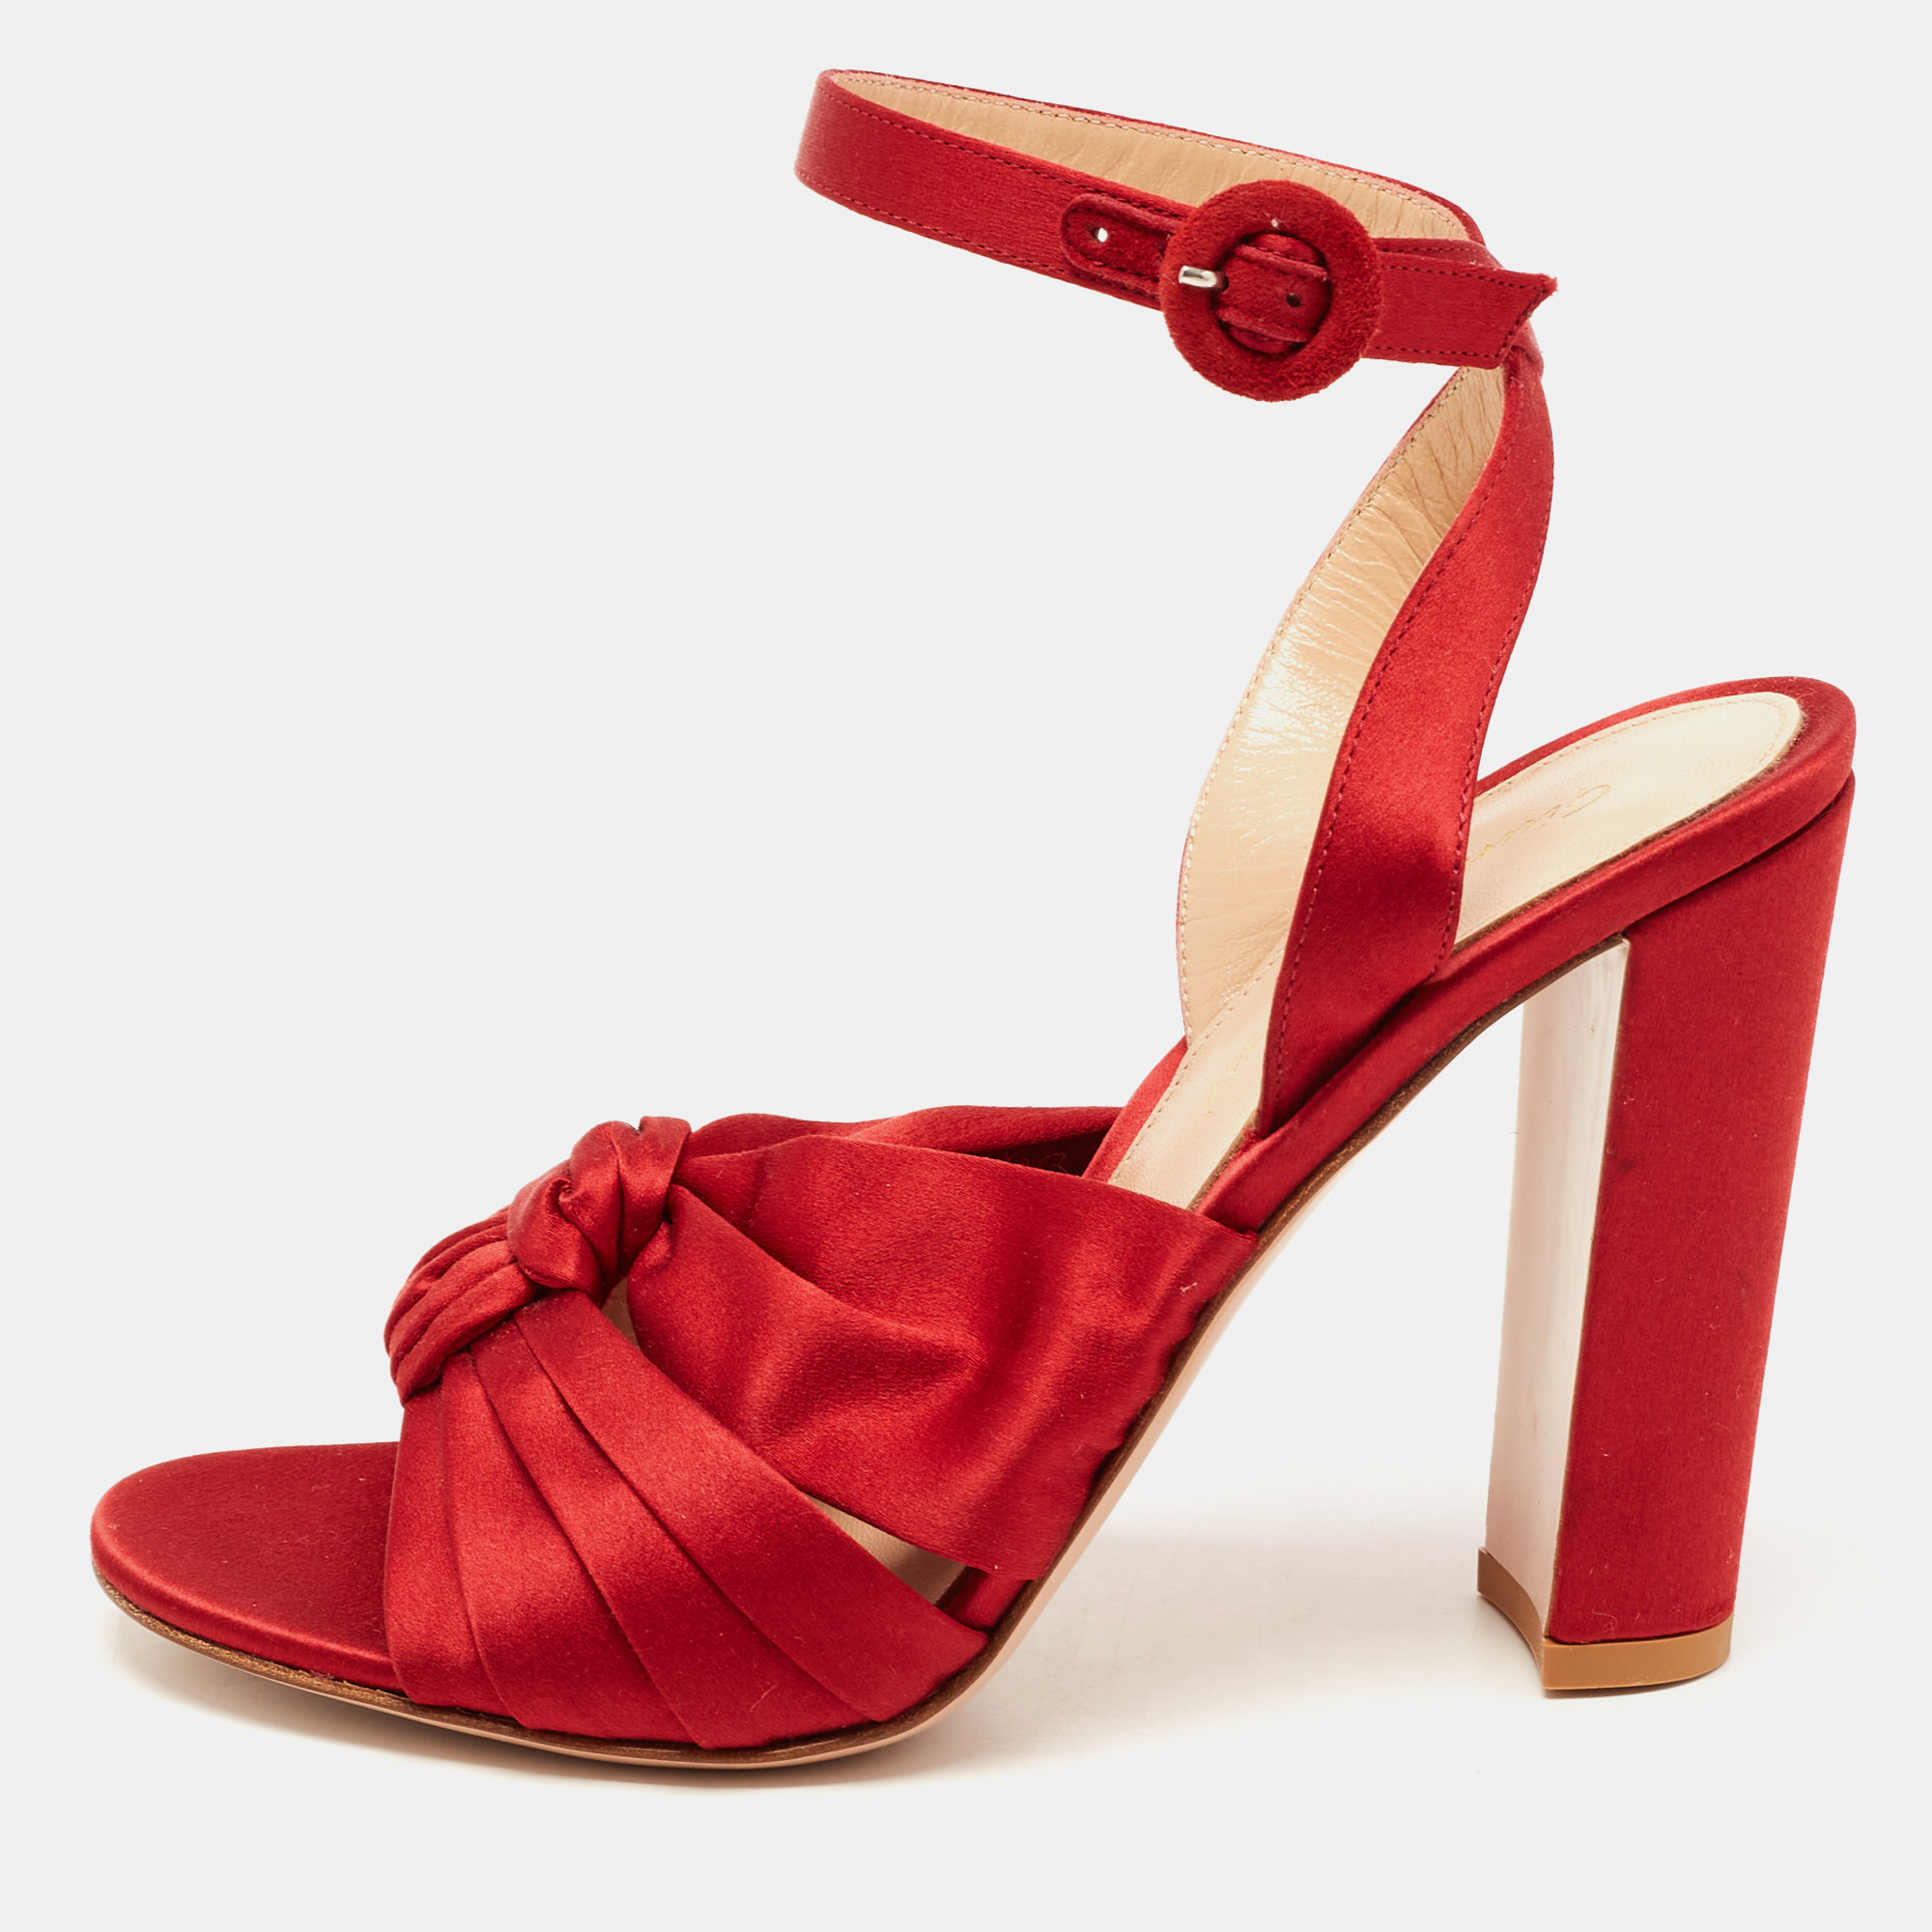 Gianvito rossi red satin knot ankle strap sandals size 37.5